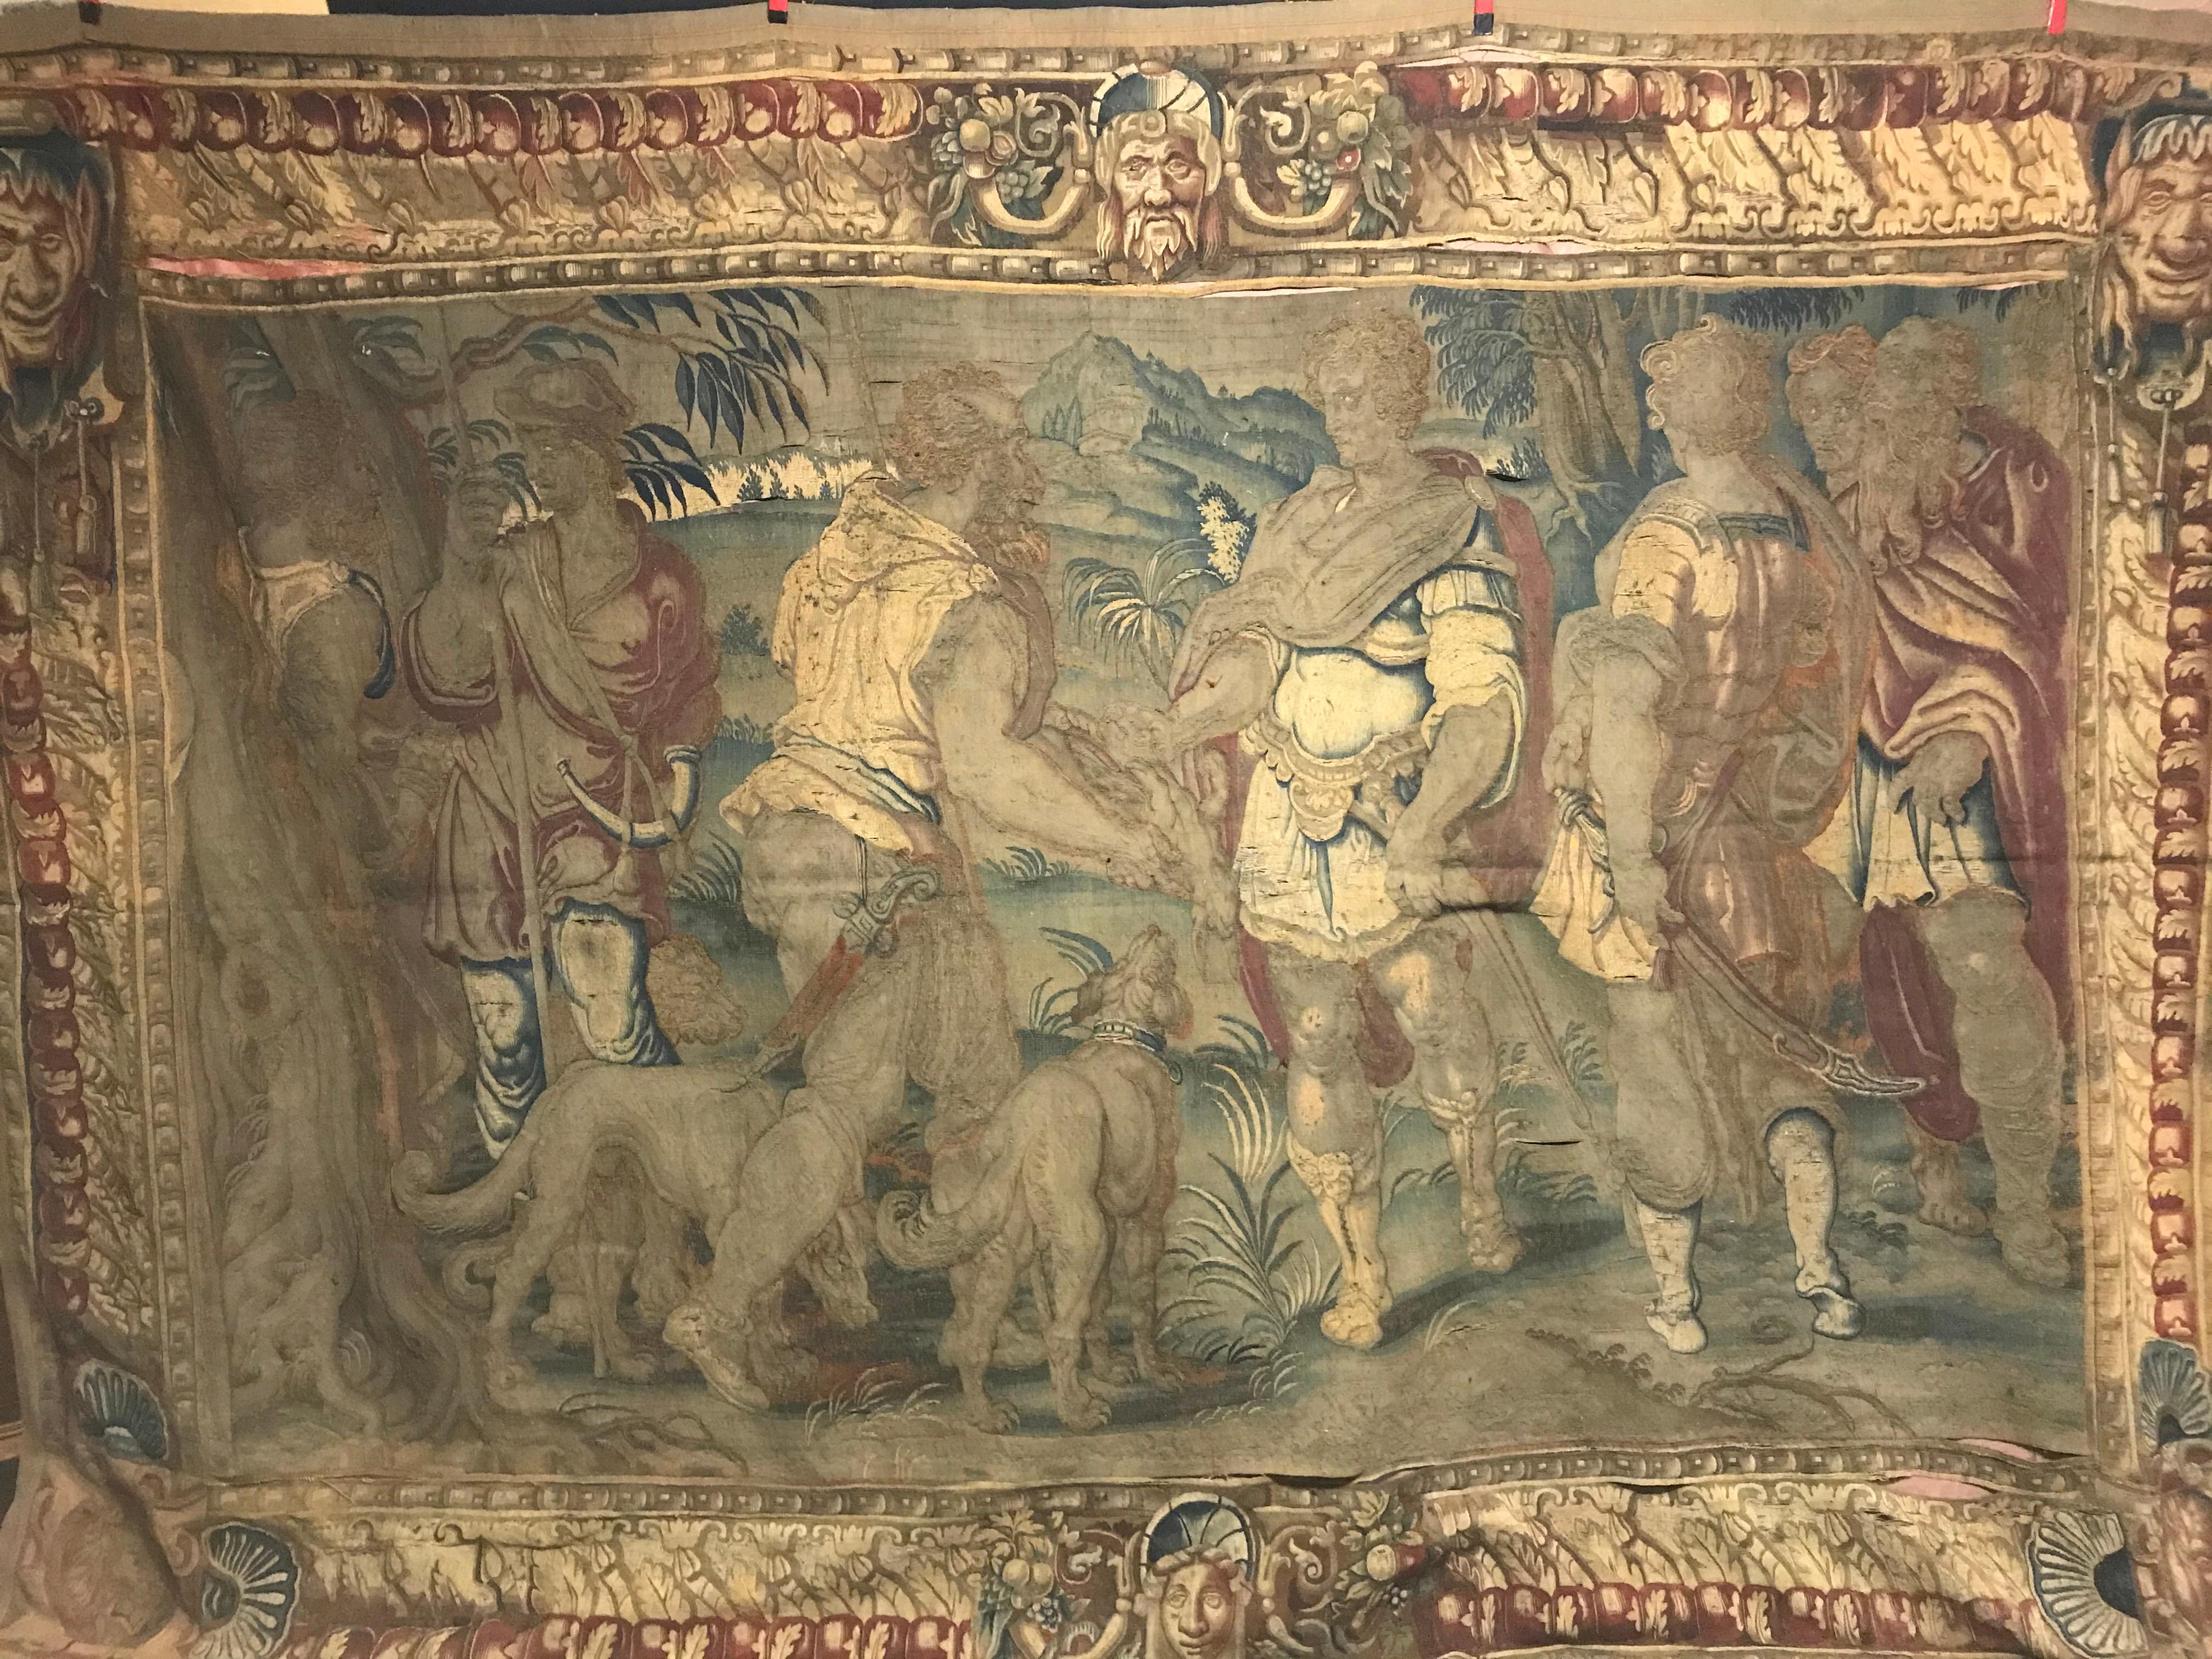 European Museum Piece from the 16th-17th Century, Renaissance Style Tapestry Canvas